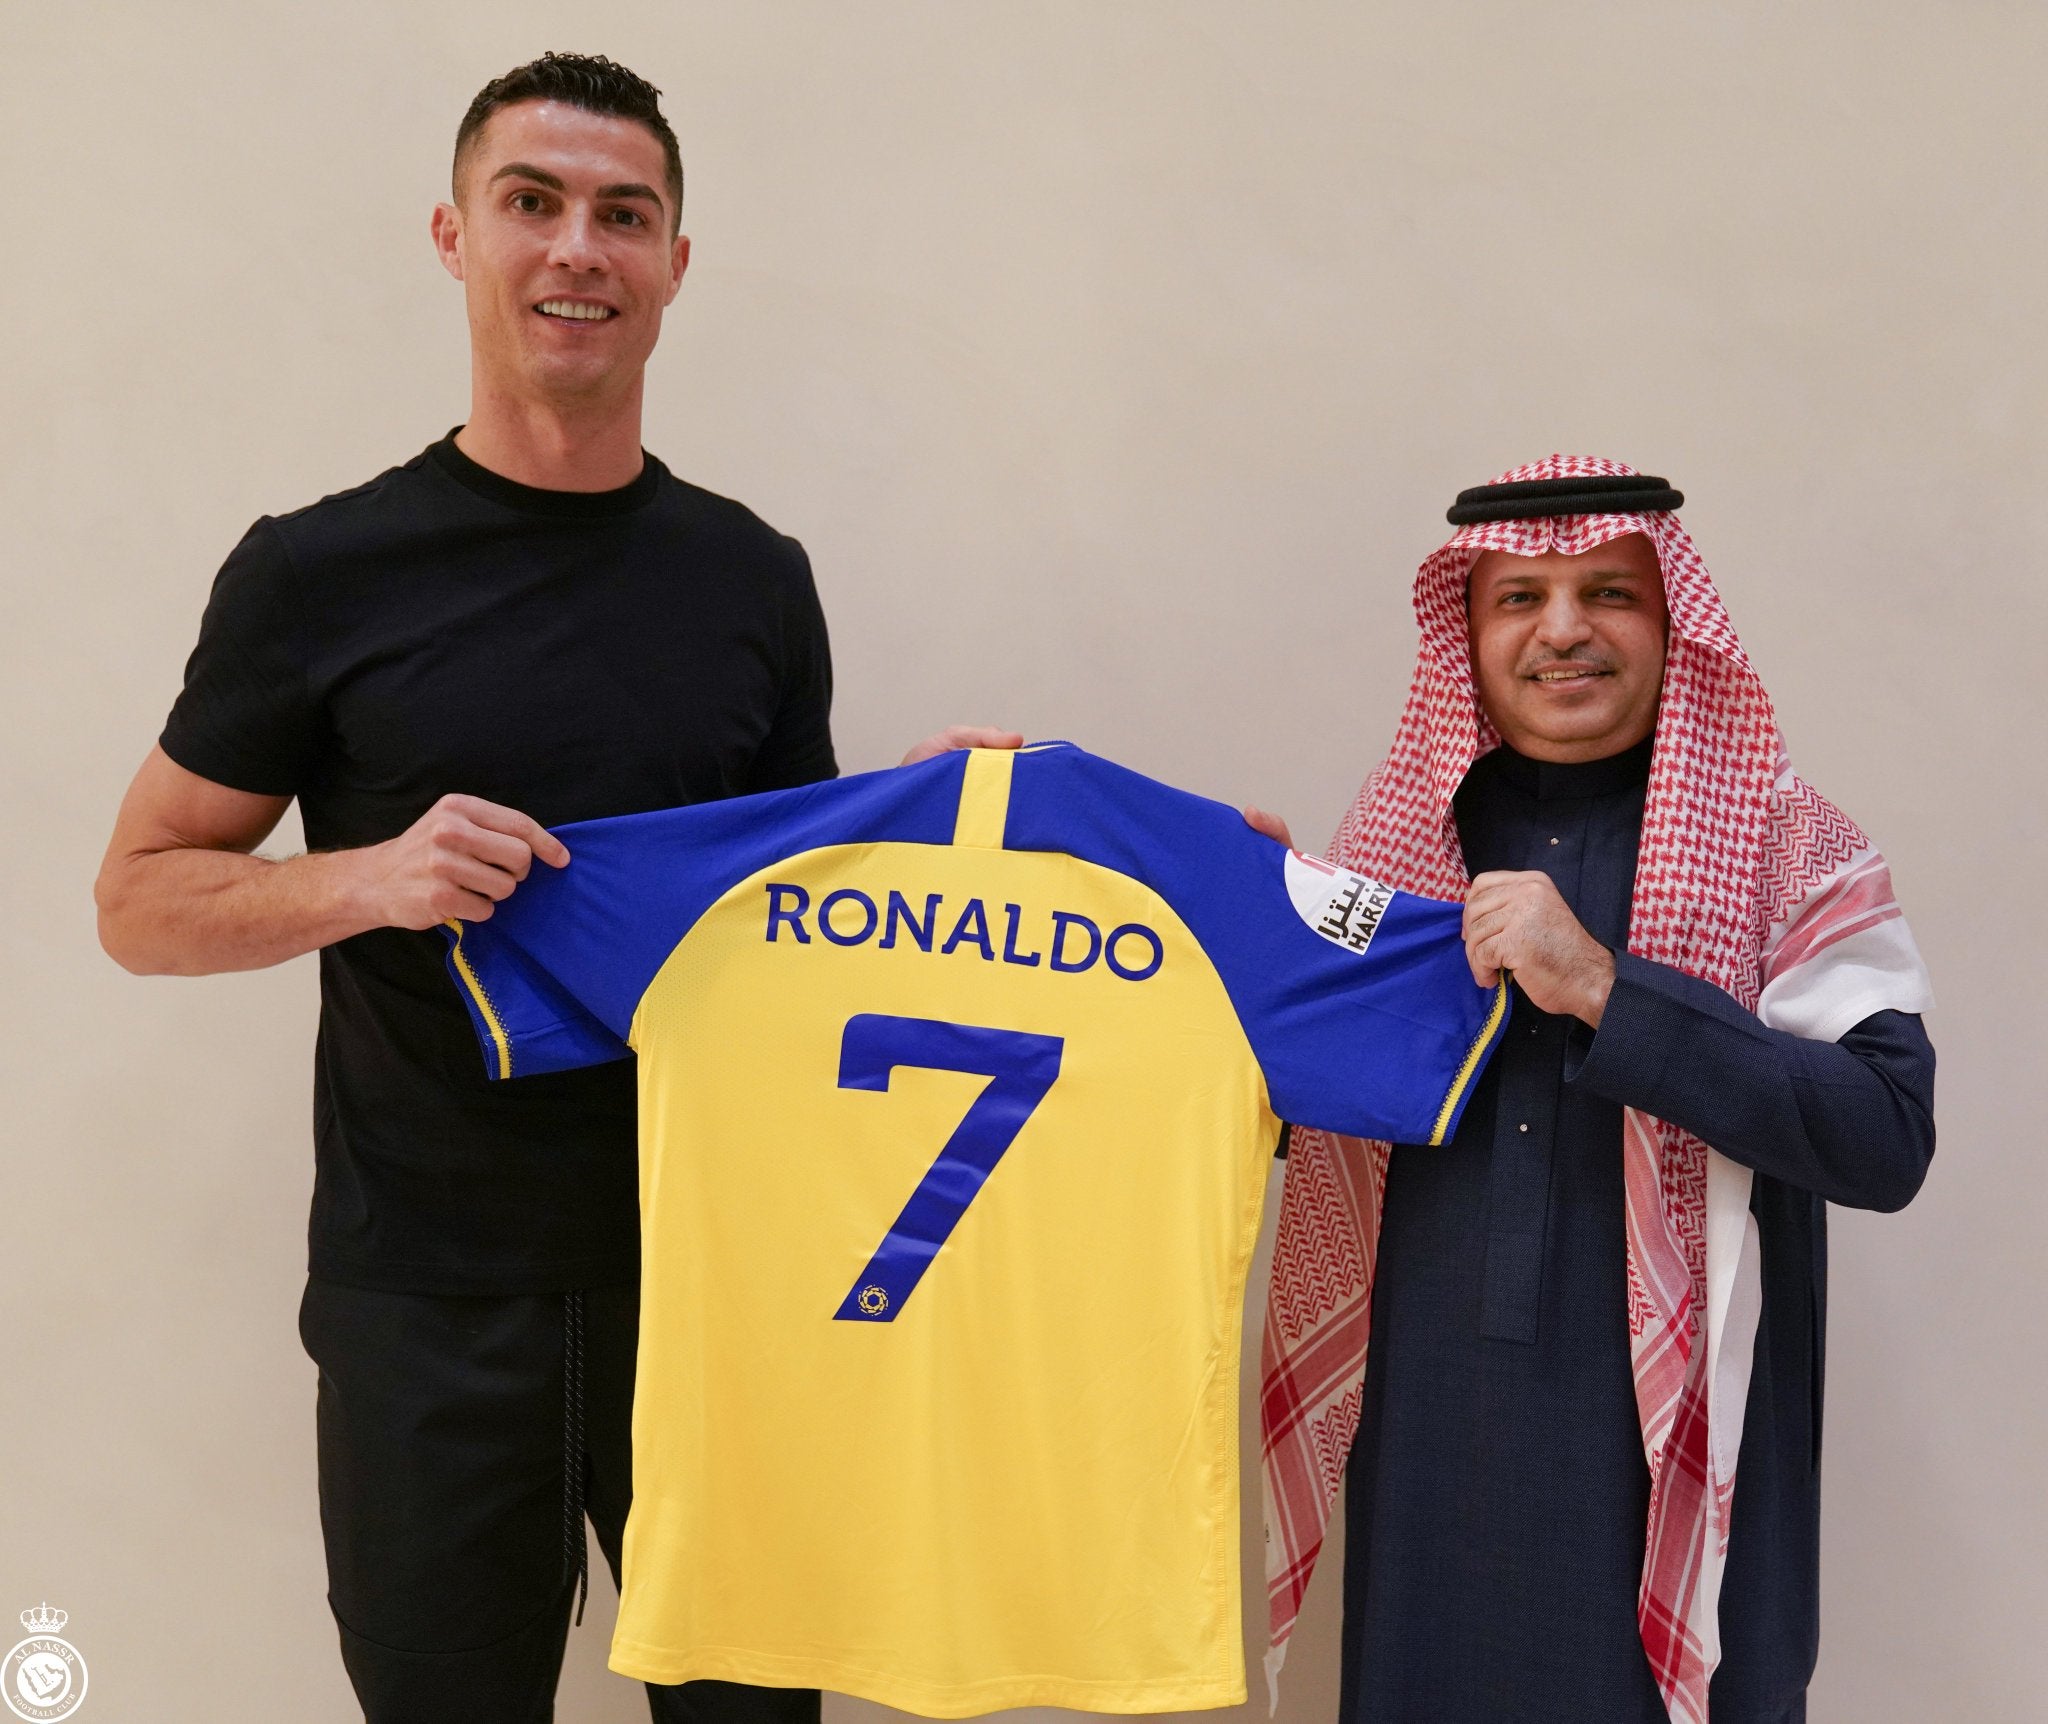 Ronaldo’s signing for Al-Nassr was announced this week